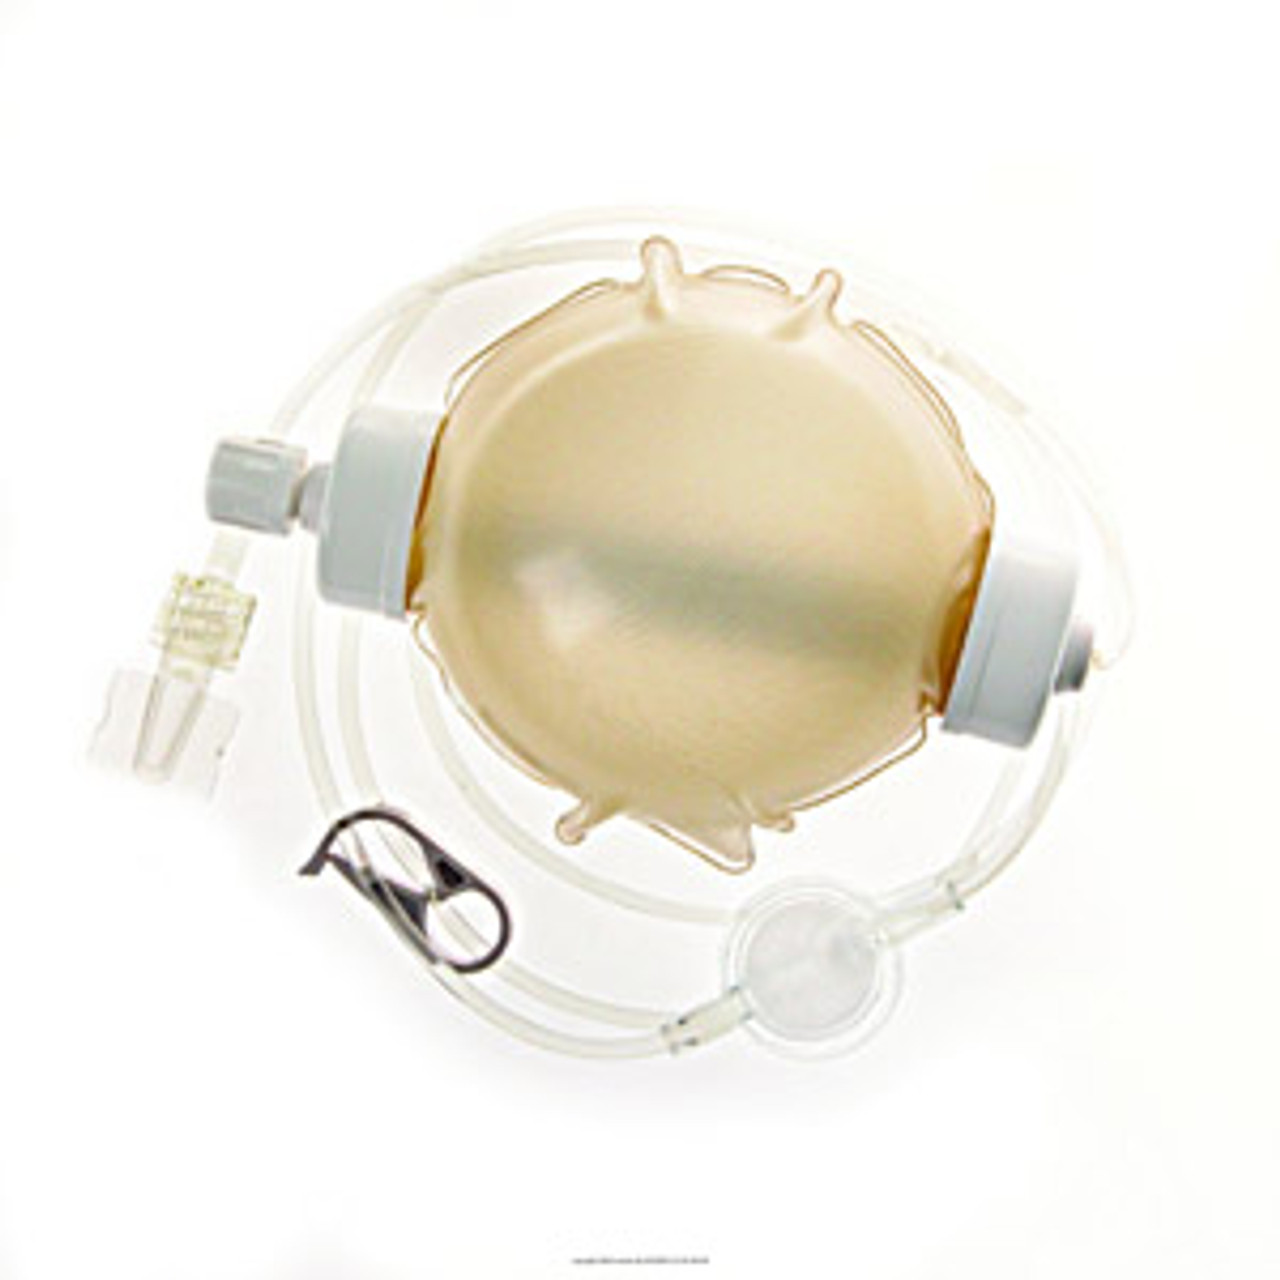 Homepump Eclipse® Disposable Elastomeric Infusion Devices BRAE251750CS